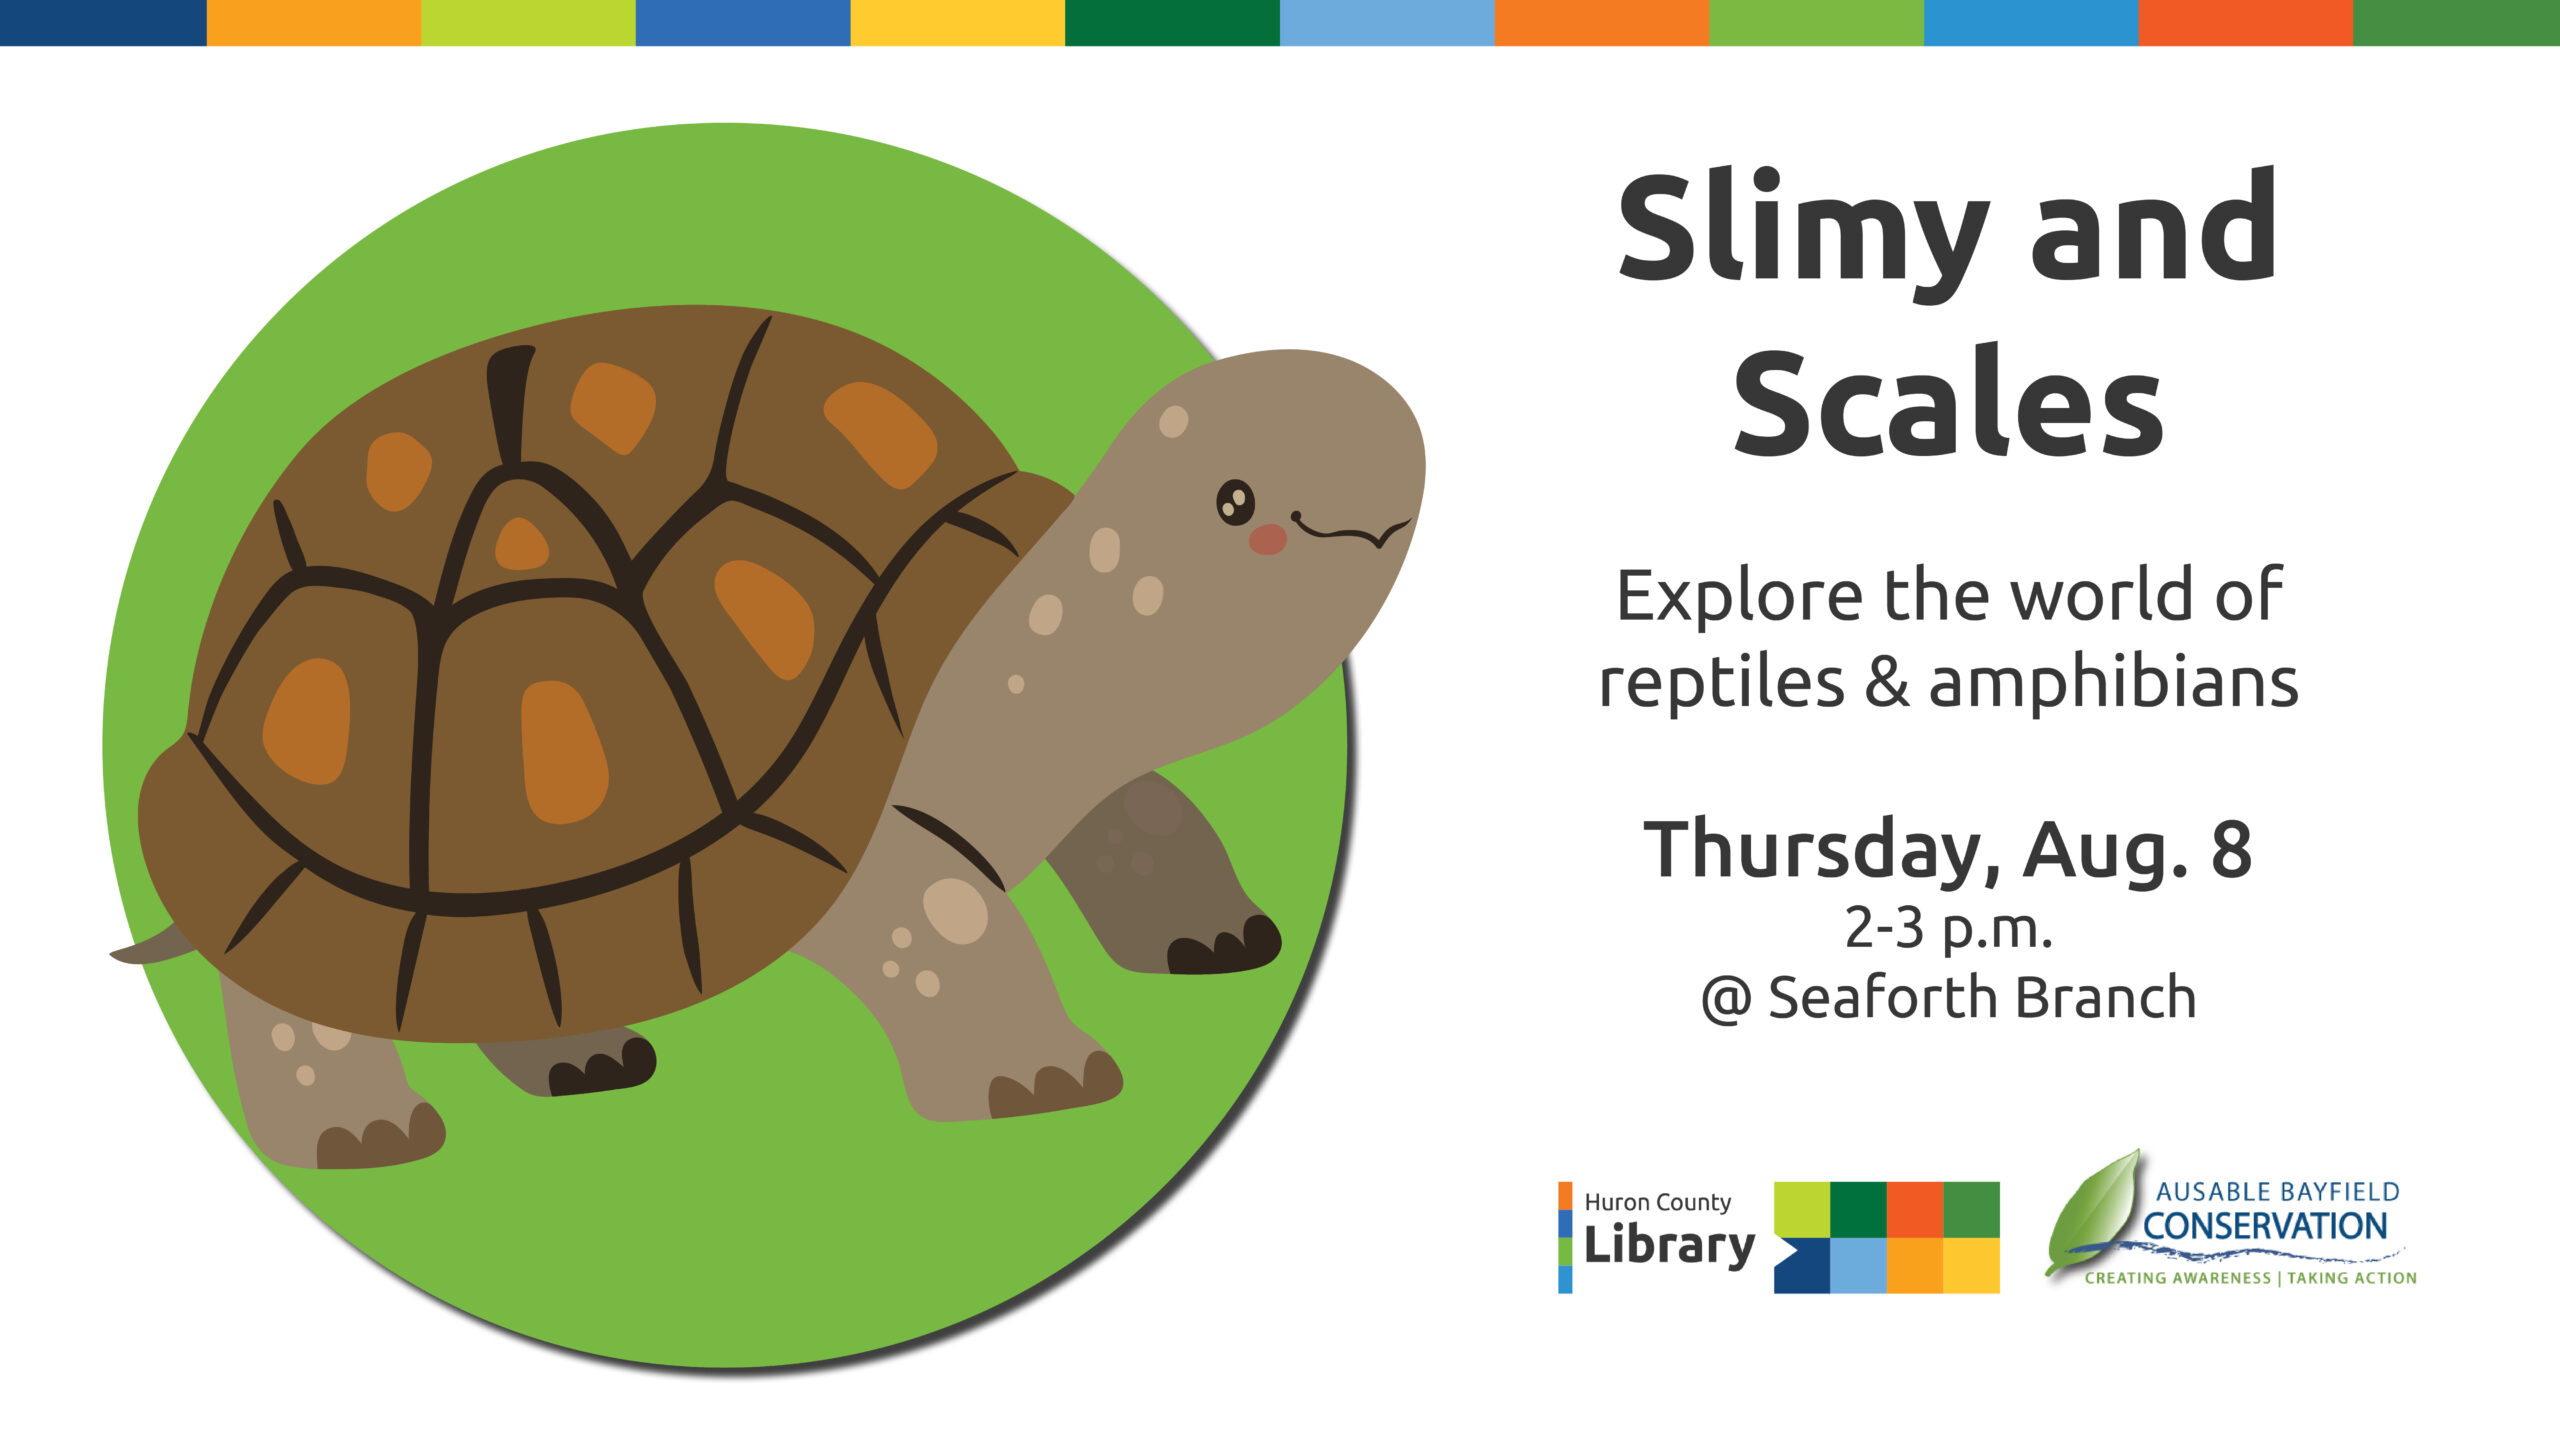 Illustration of a turtle with text promoting Slimy and Scales at Seaforth